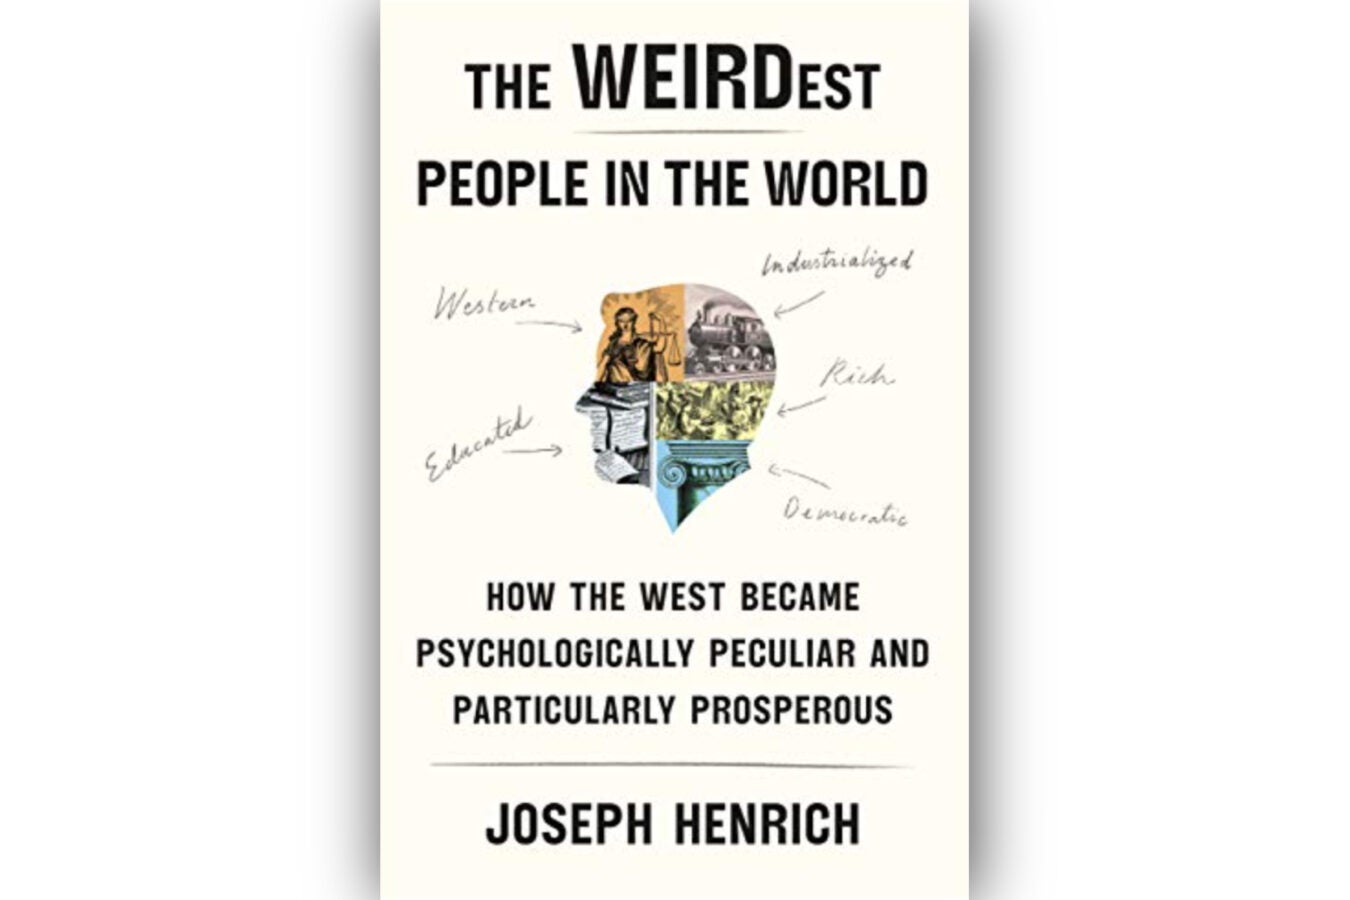 Book cover: “The WEIRDest People in the World: How the West Became Psychologically Peculiar and Particularly Prosperous.”